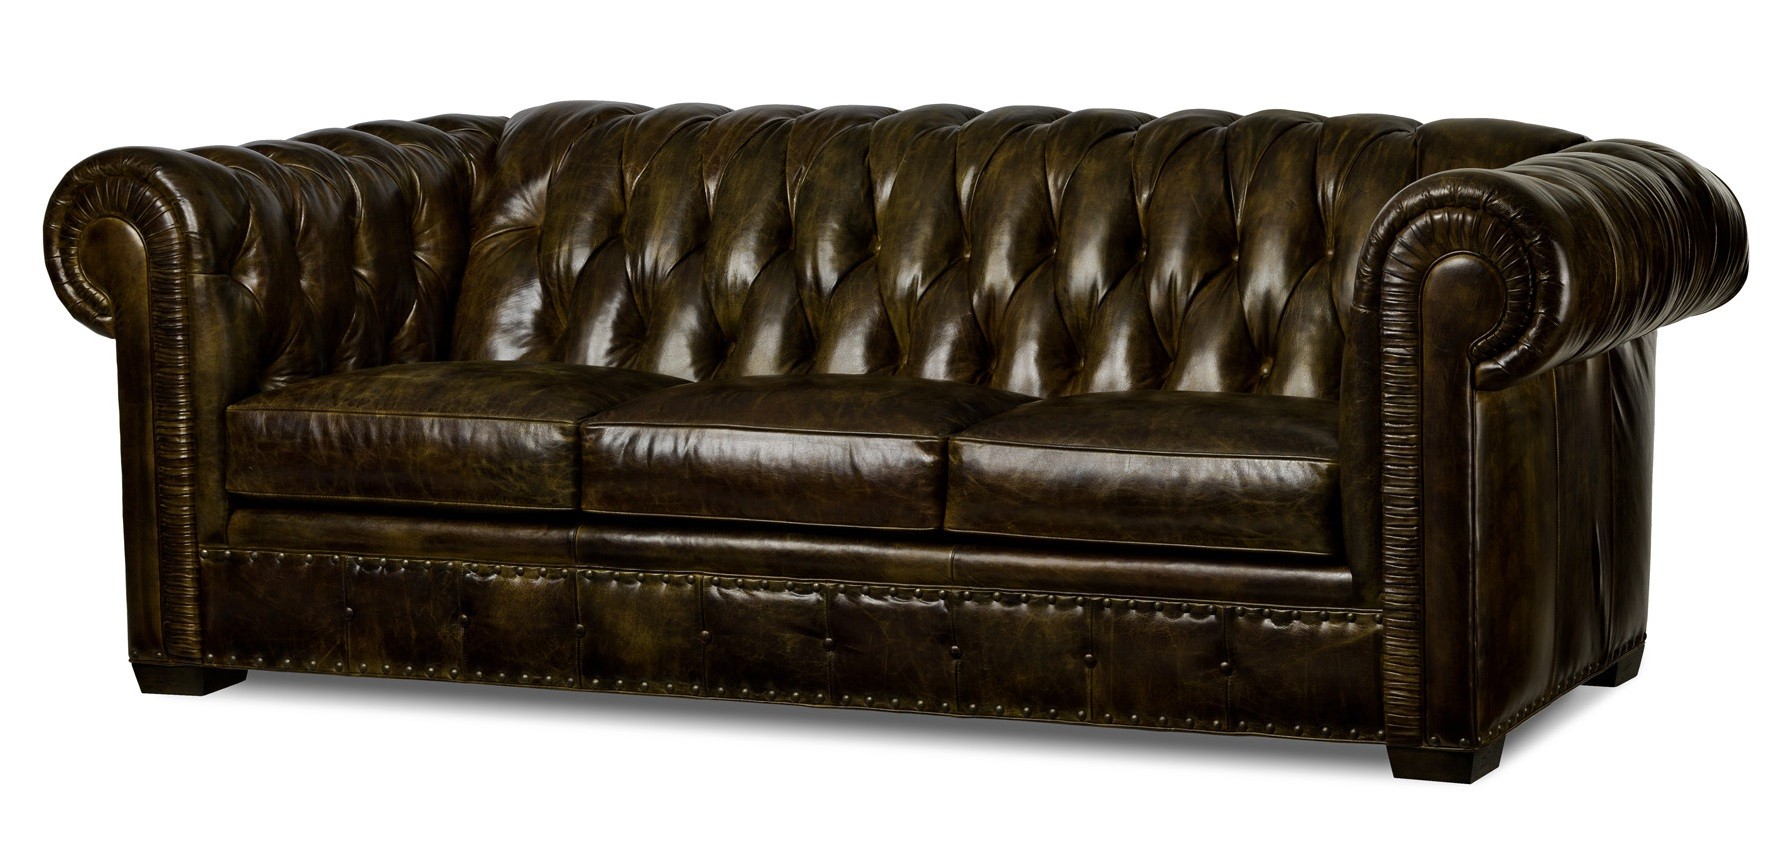 SOFA, COUCH & LOVESEAT Breathtaking Mother Earth Buttoned Leather Sofa